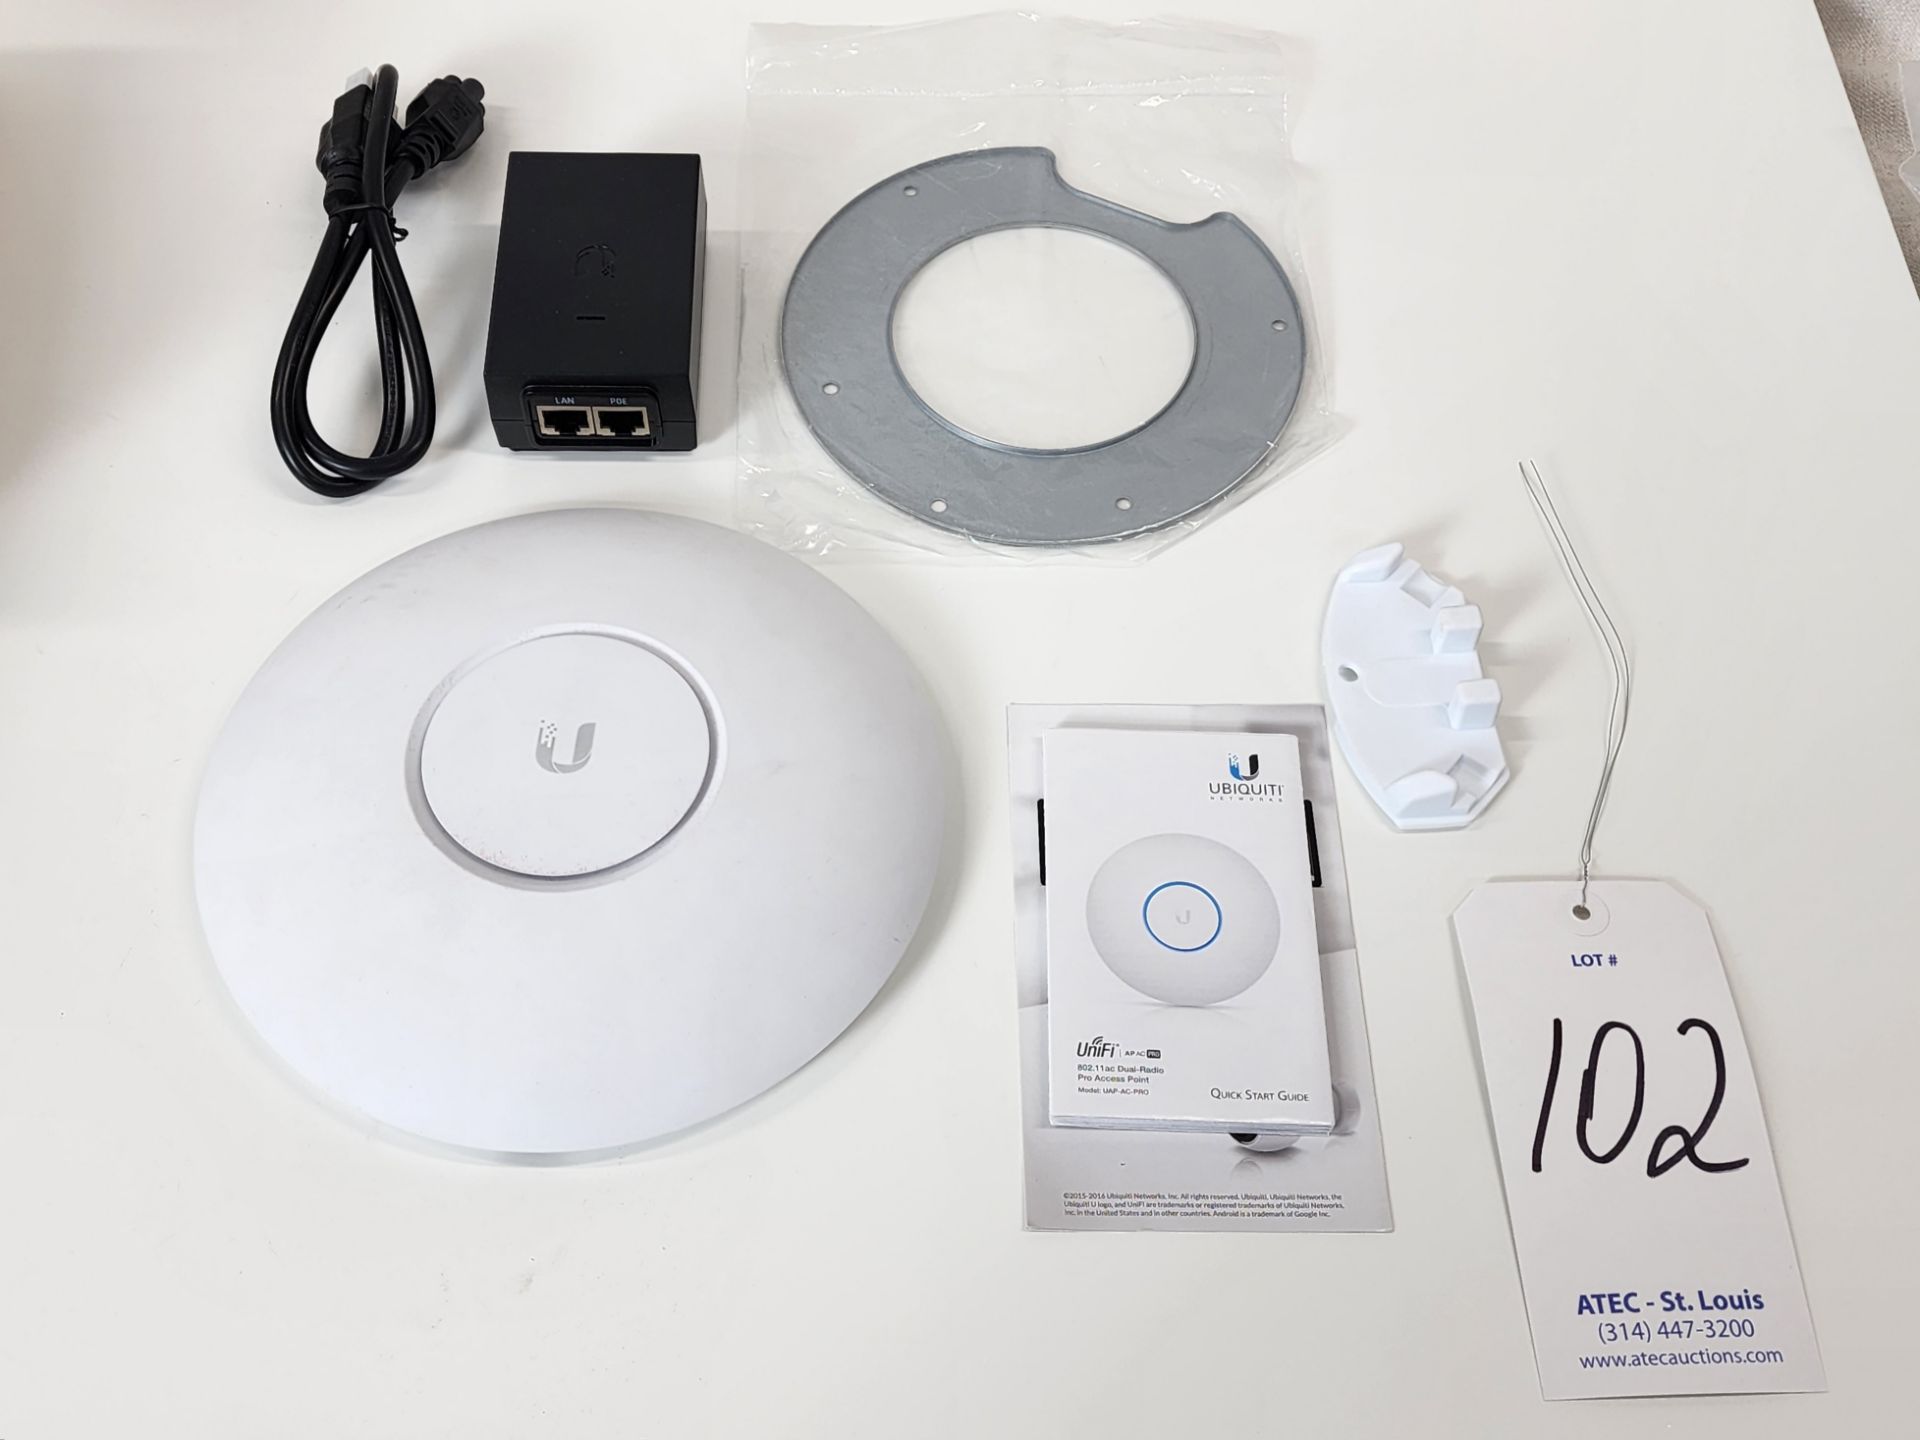 Ubiquiti UniFi Model UAP-AC-Pro Dual Band Access Point, 2.4 GHz & 5 GHz Bands, w/Ceiling & Wall - Image 2 of 3